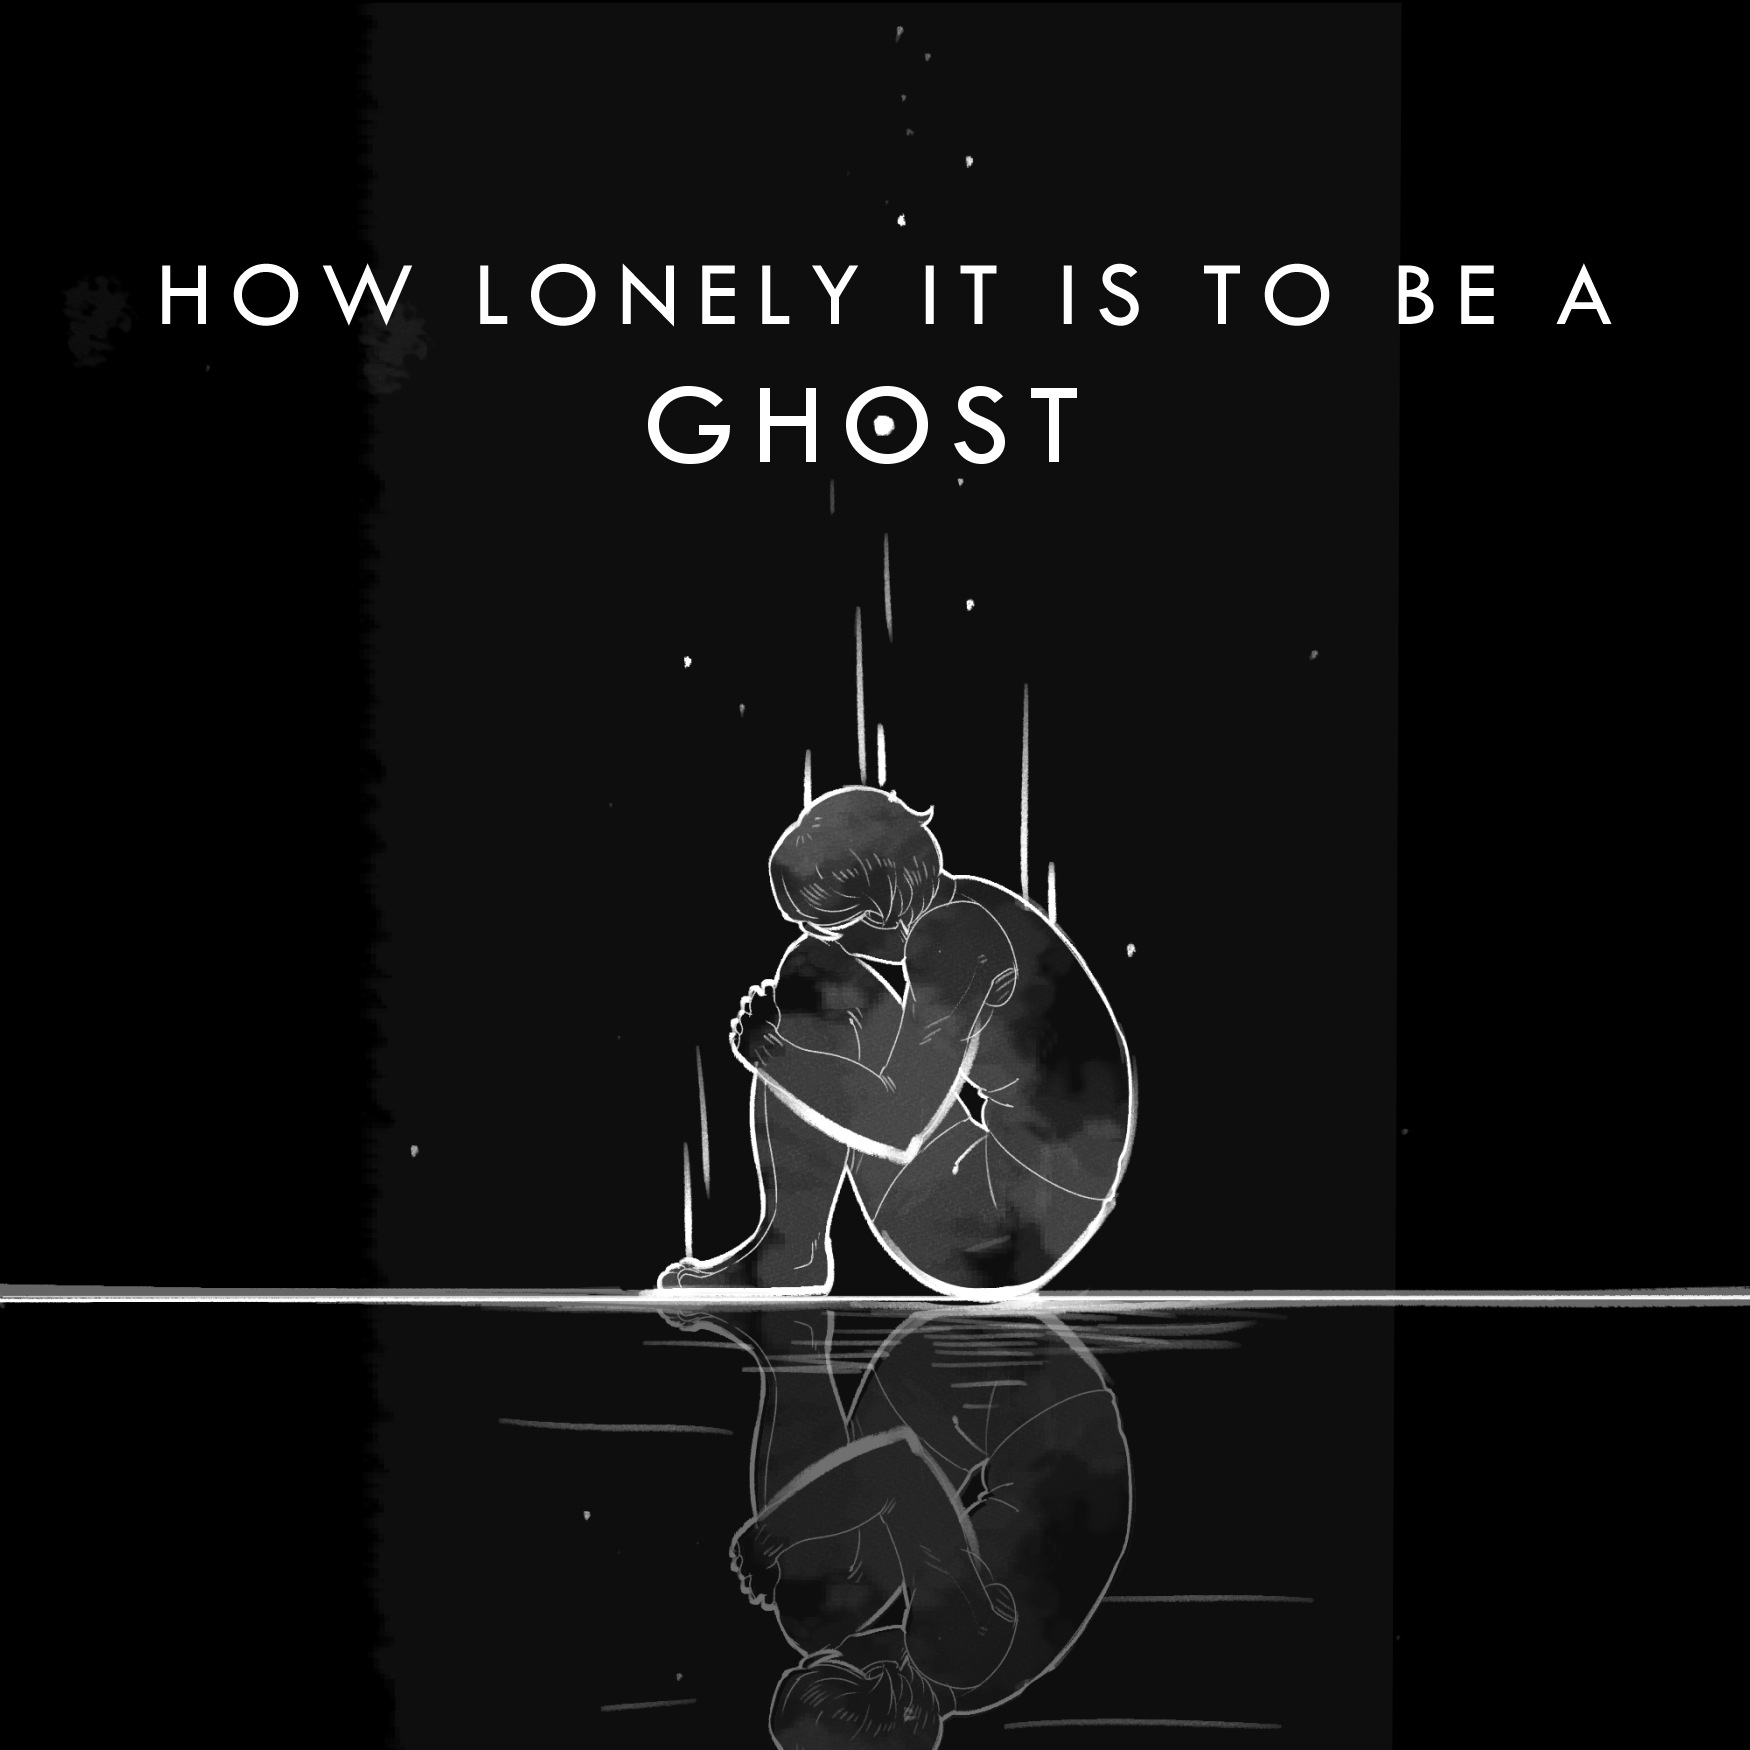 HOW LONELY IT IS TO BE A GHOST by Valistarri